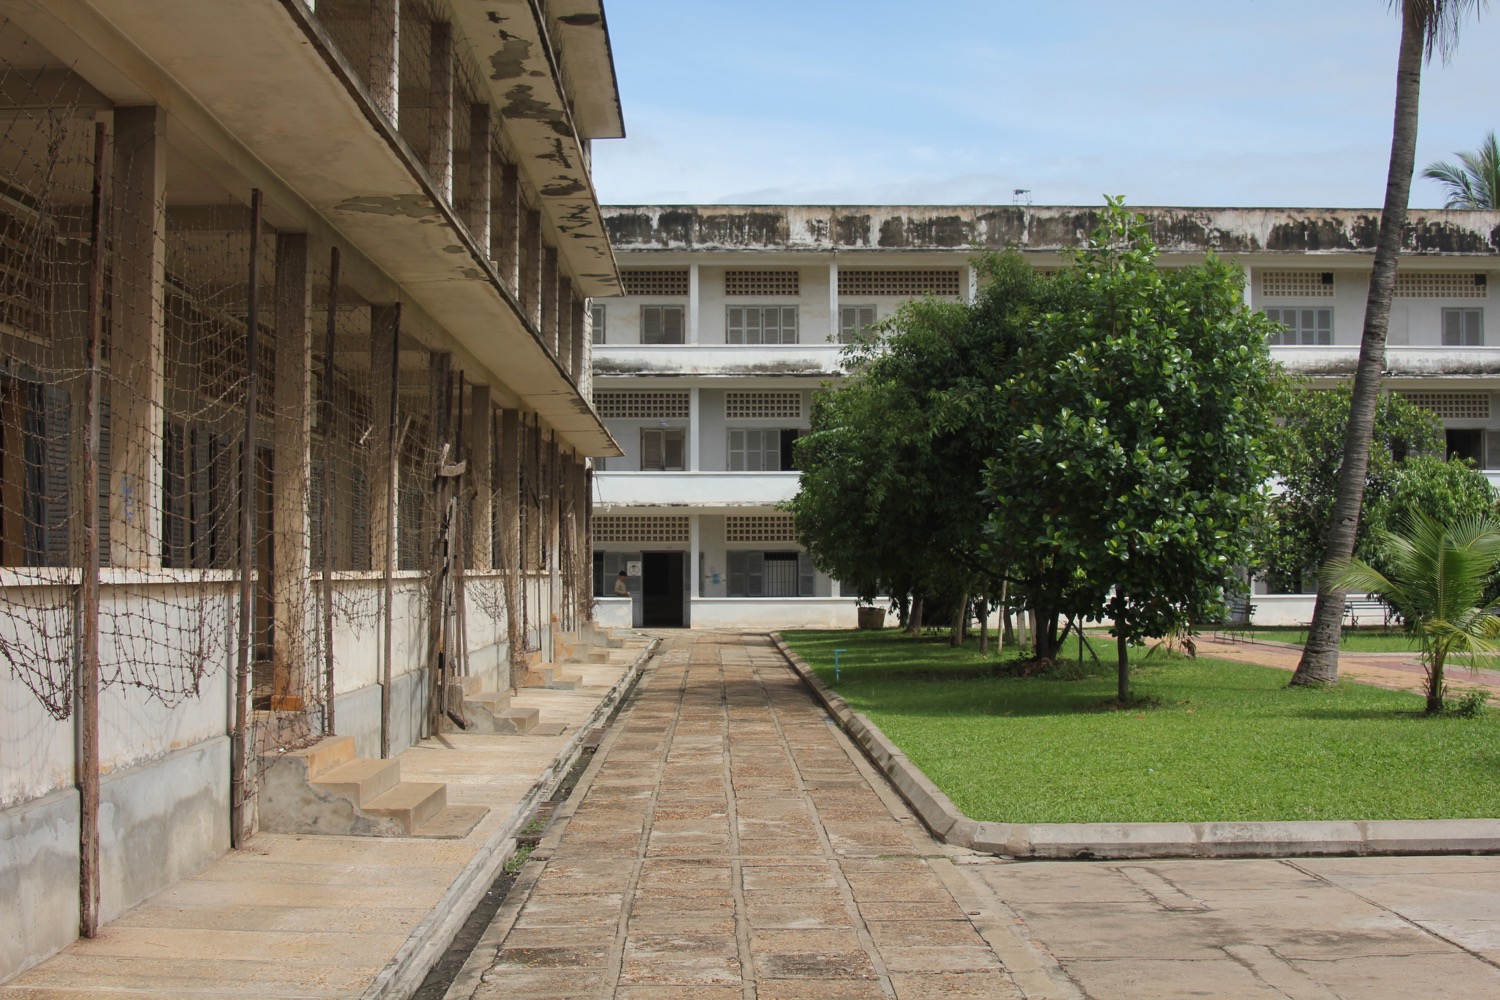 Tuol Sleng Genocide Museum - 15